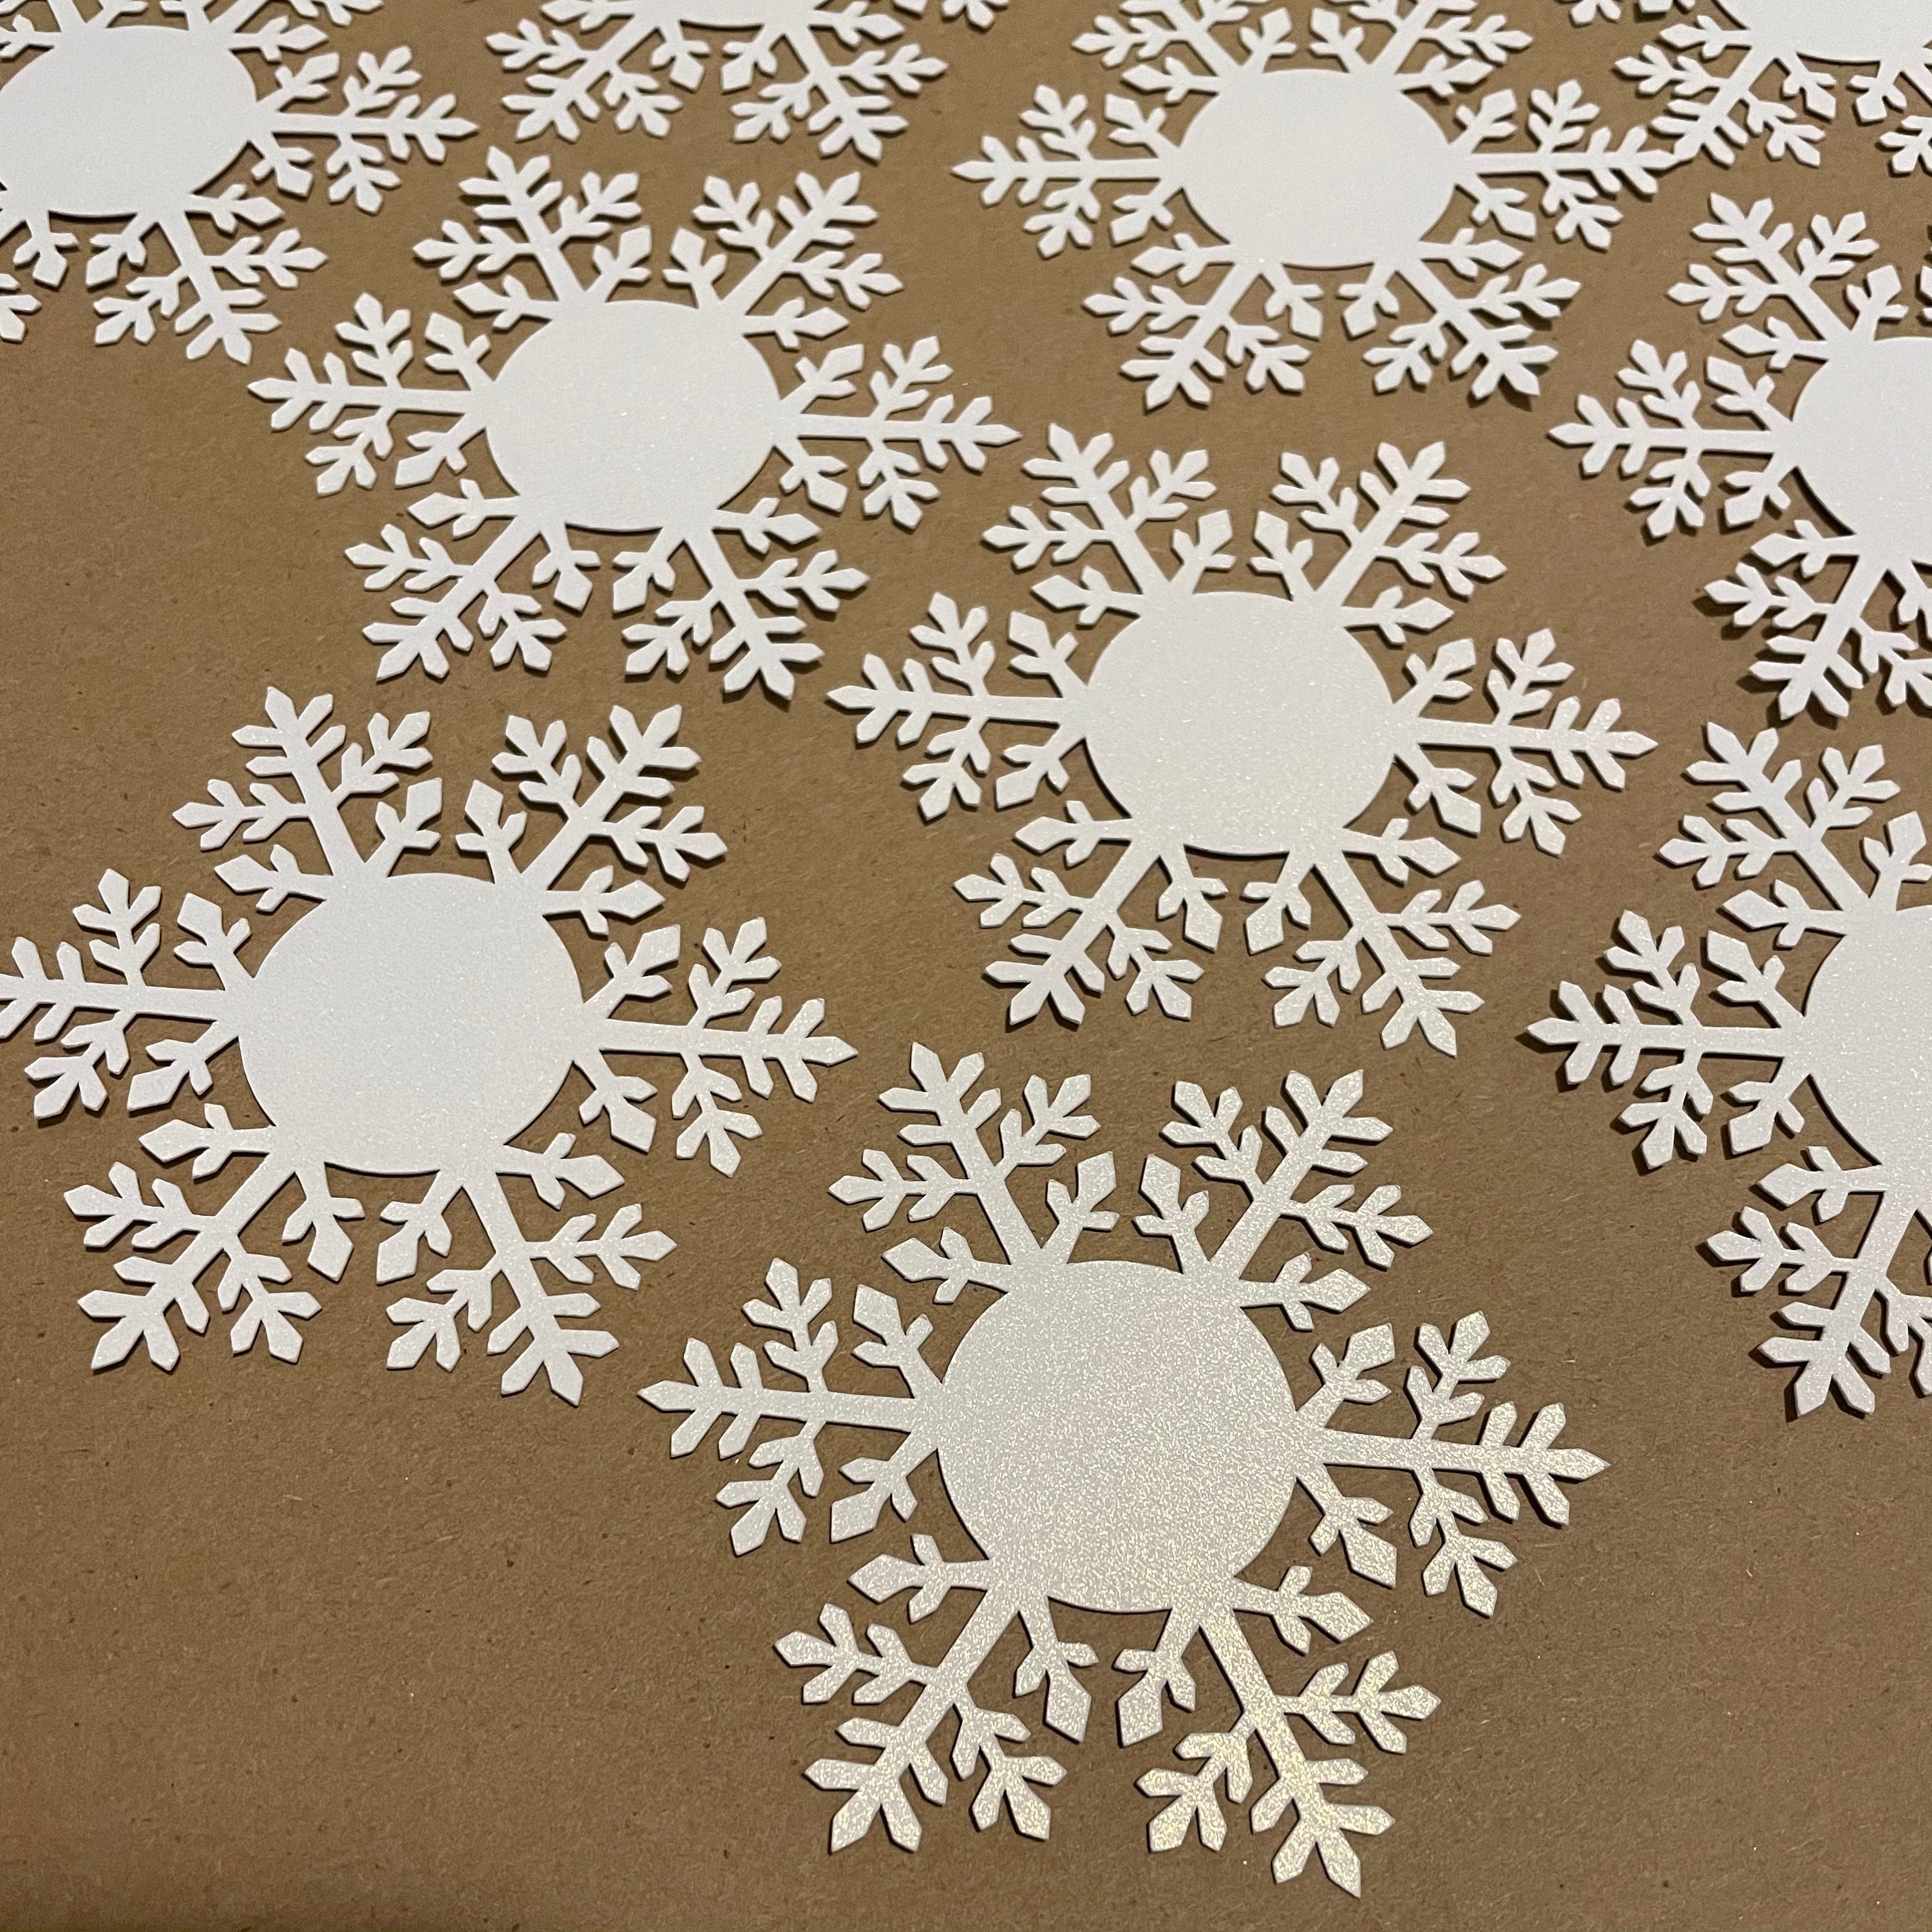 Grey and White Felt Snowflakes Mix, 30 Die Cut Felt Snowflakes, Felt  Snowflake Shapes, Small Snowflake Pack, Felt Embellishments Craft Pack 